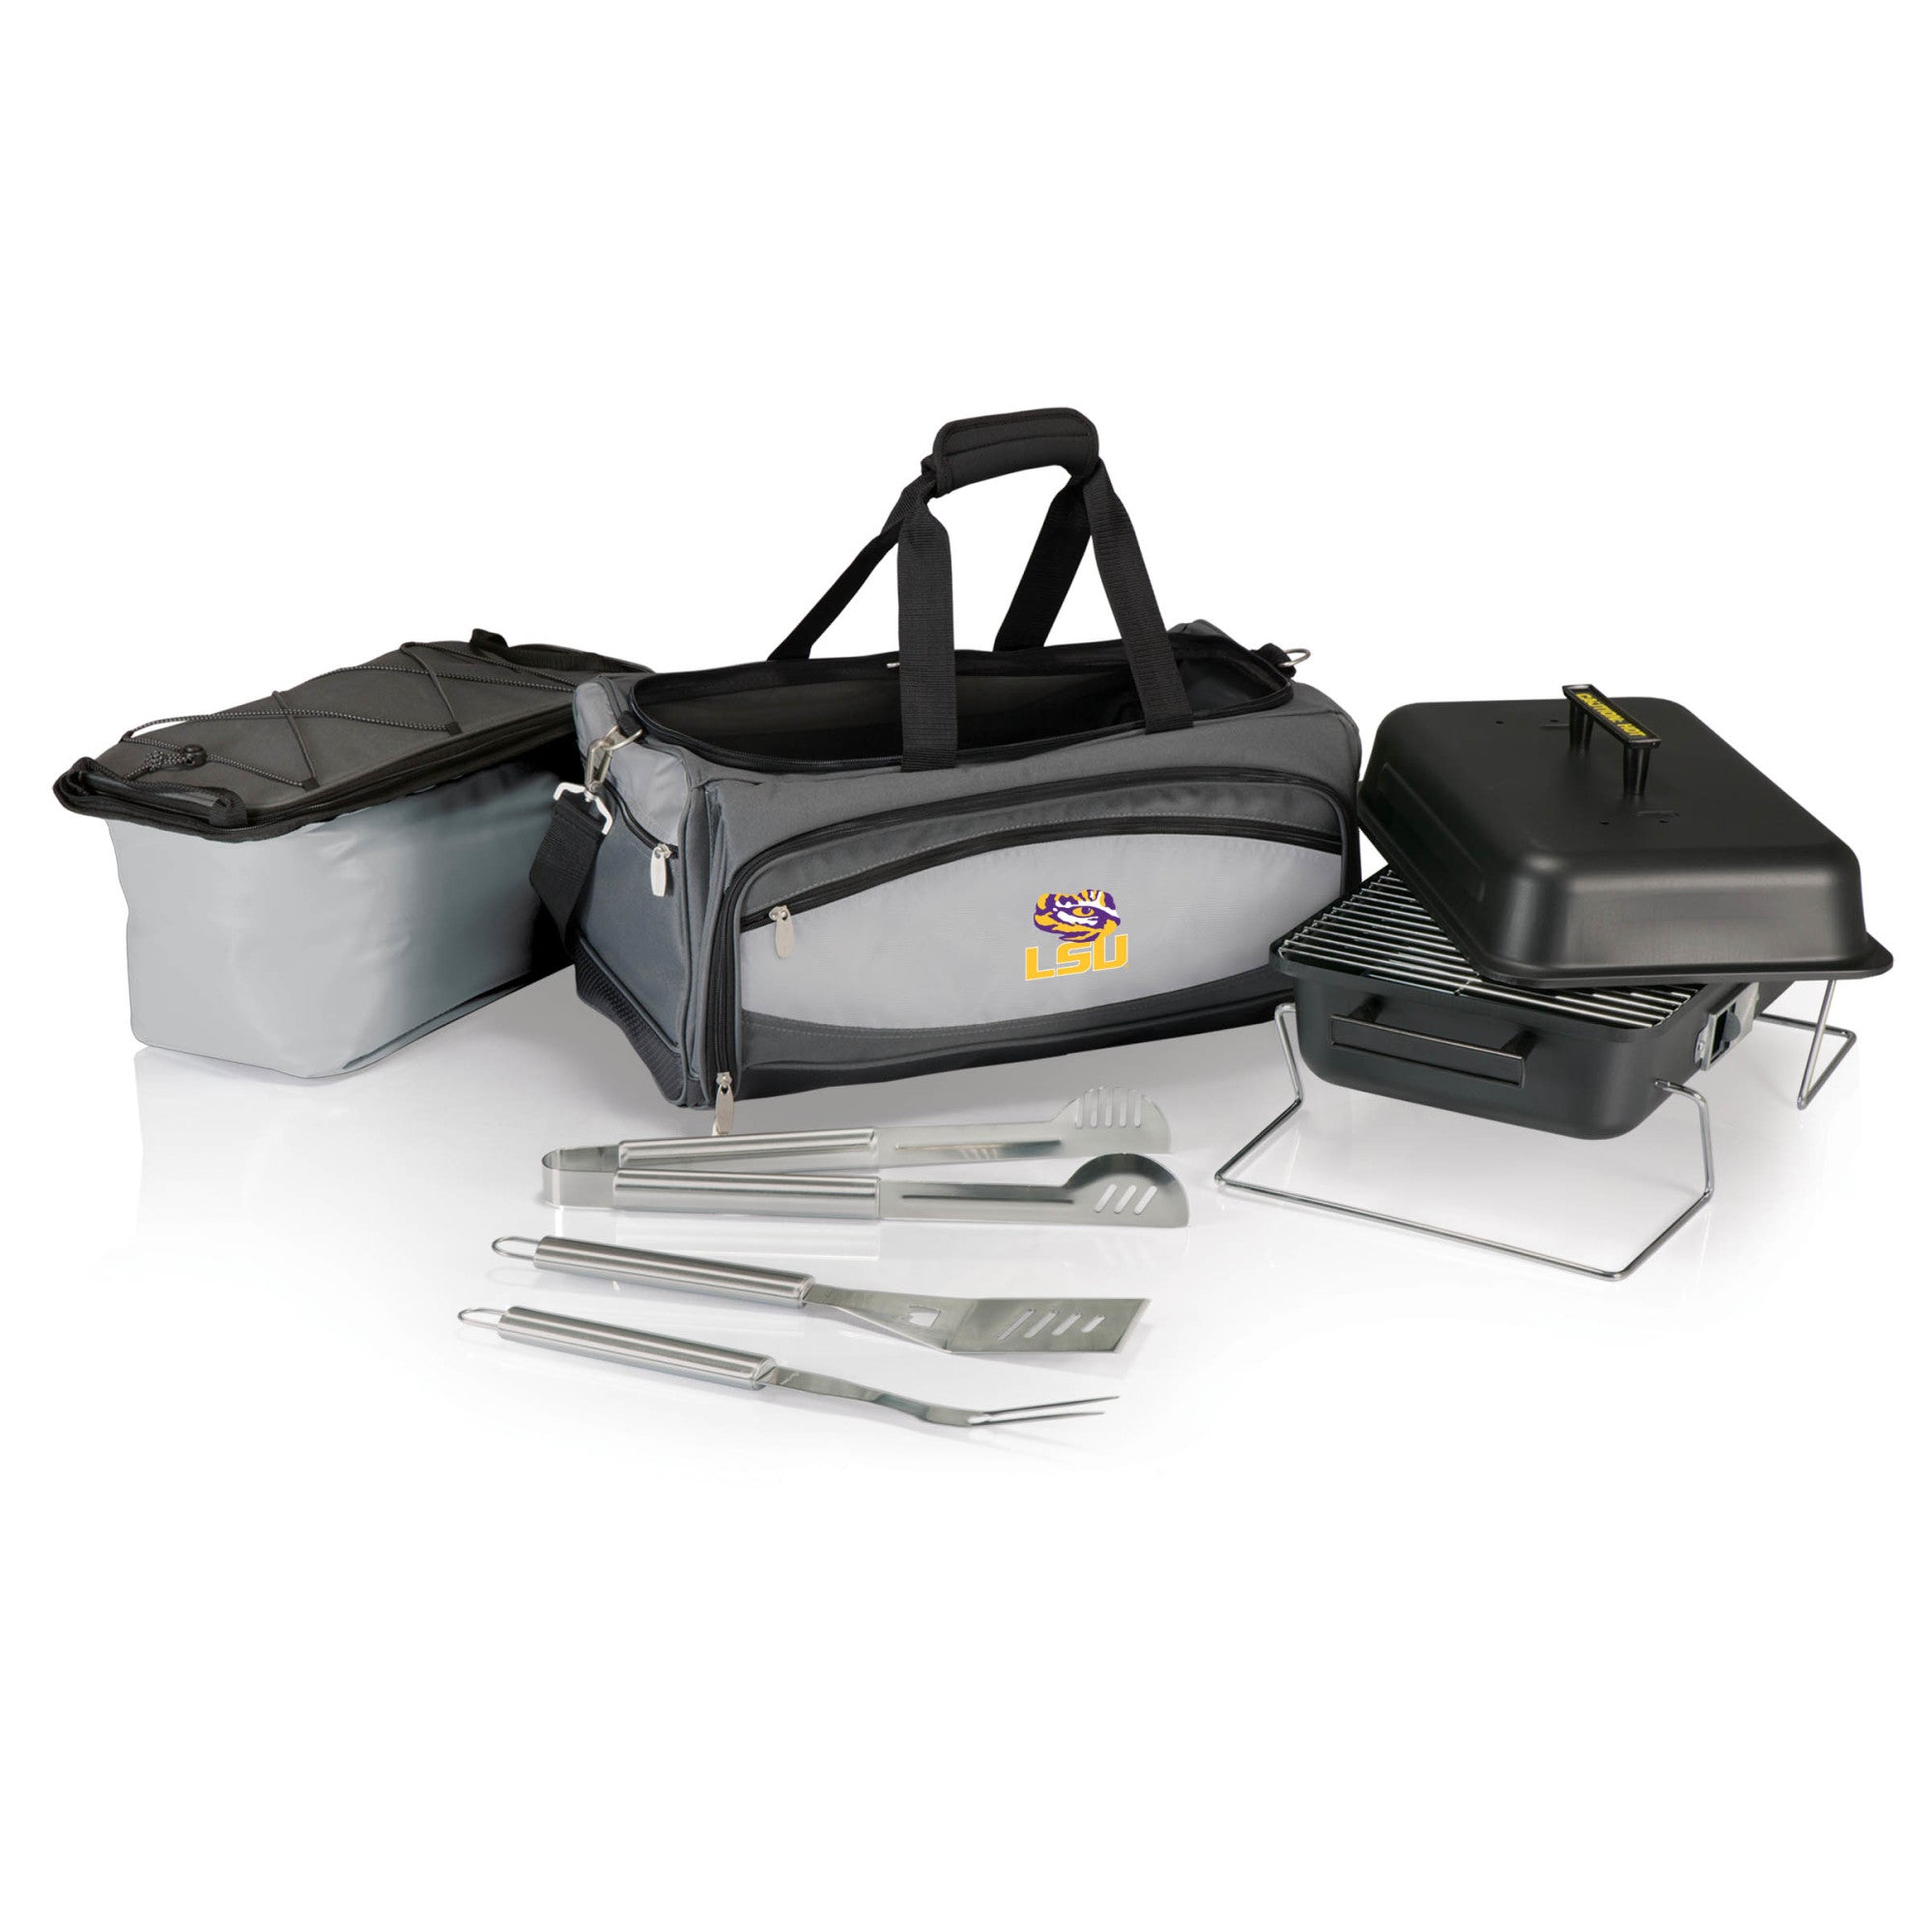 LSU Tigers - Buccaneer Portable Charcoal Grill & Cooler Tote